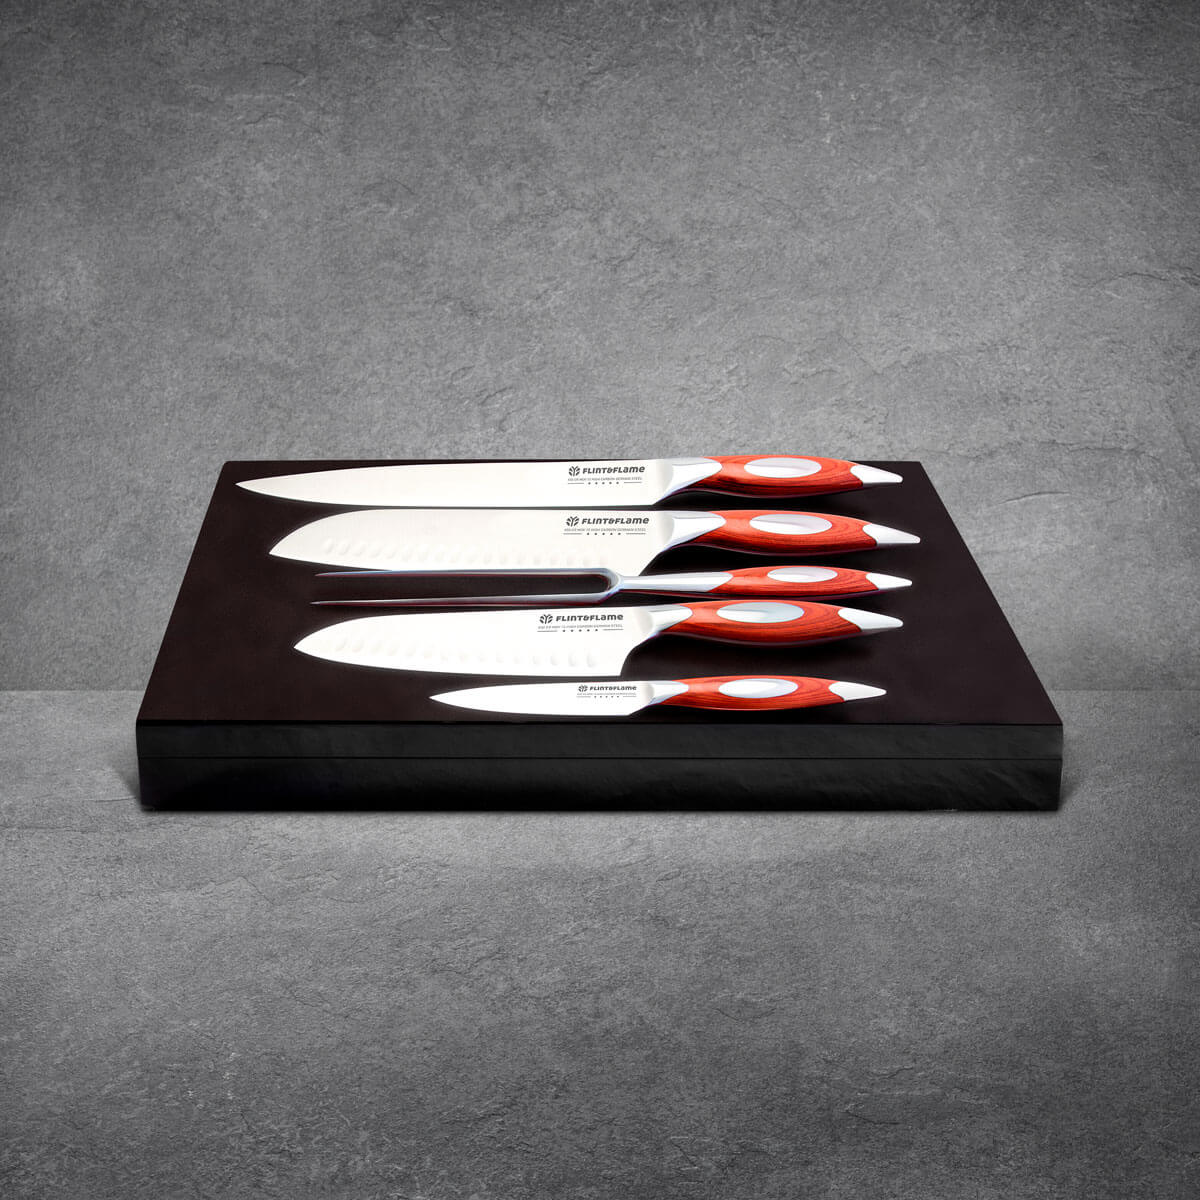 Flint & Flame Gourmet 5 piece Set - FF-5PCGOUR-W - The Cotswold Knife Company